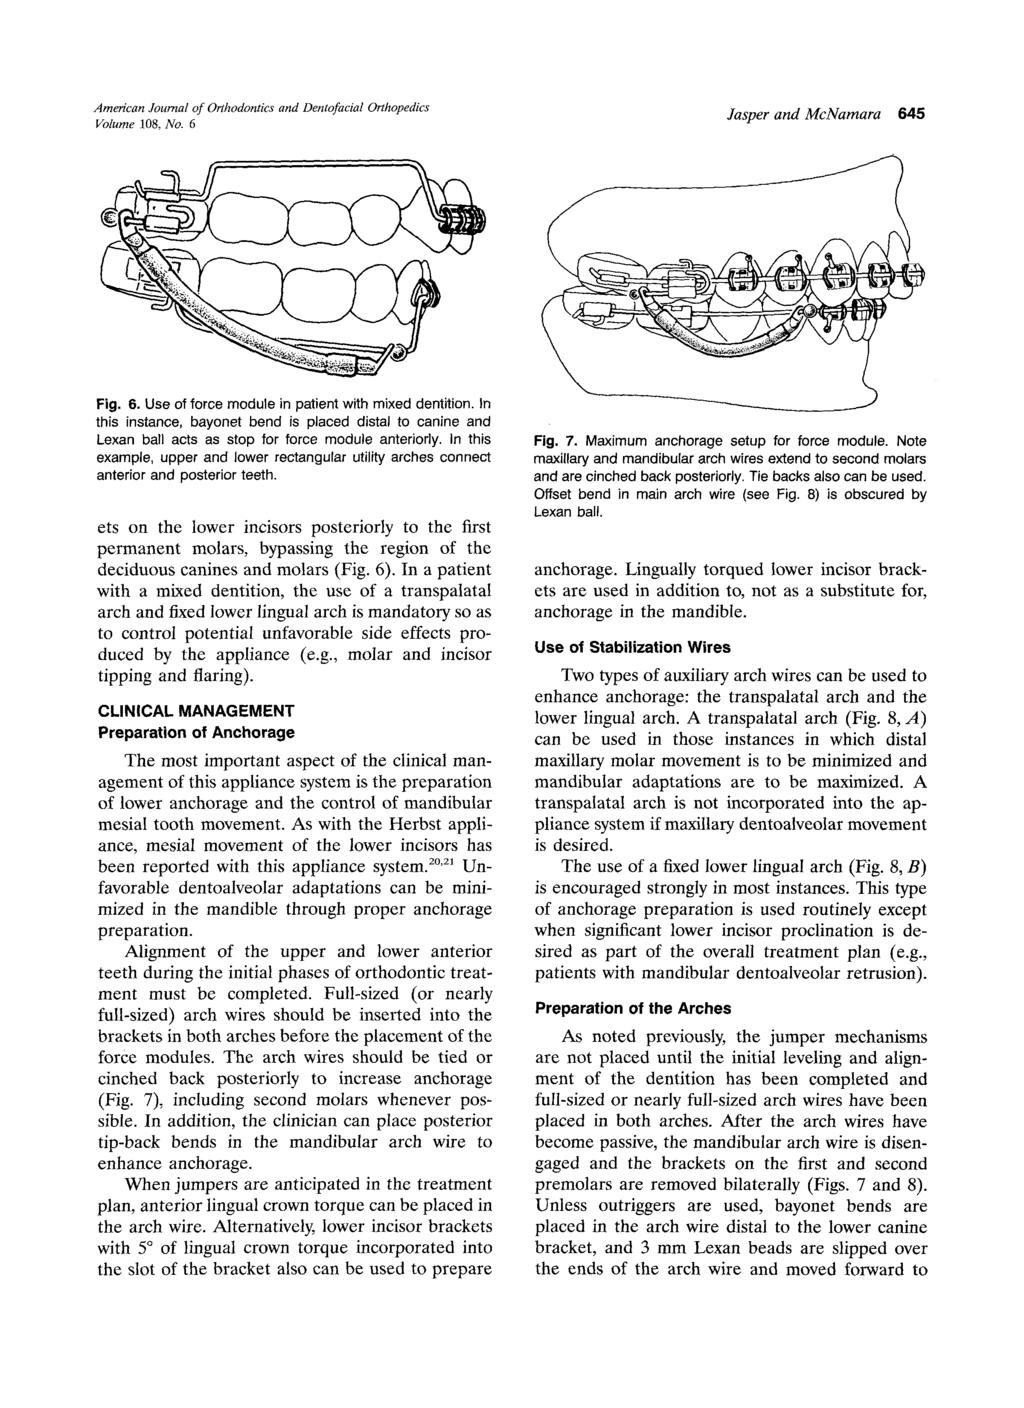 American Journal of Orthodontics and Dentofacial Orthopedics Jasper and McNamara 645 Volume 108, No. 6 Fig. 6. Use of force module in patient with mixed dentition.